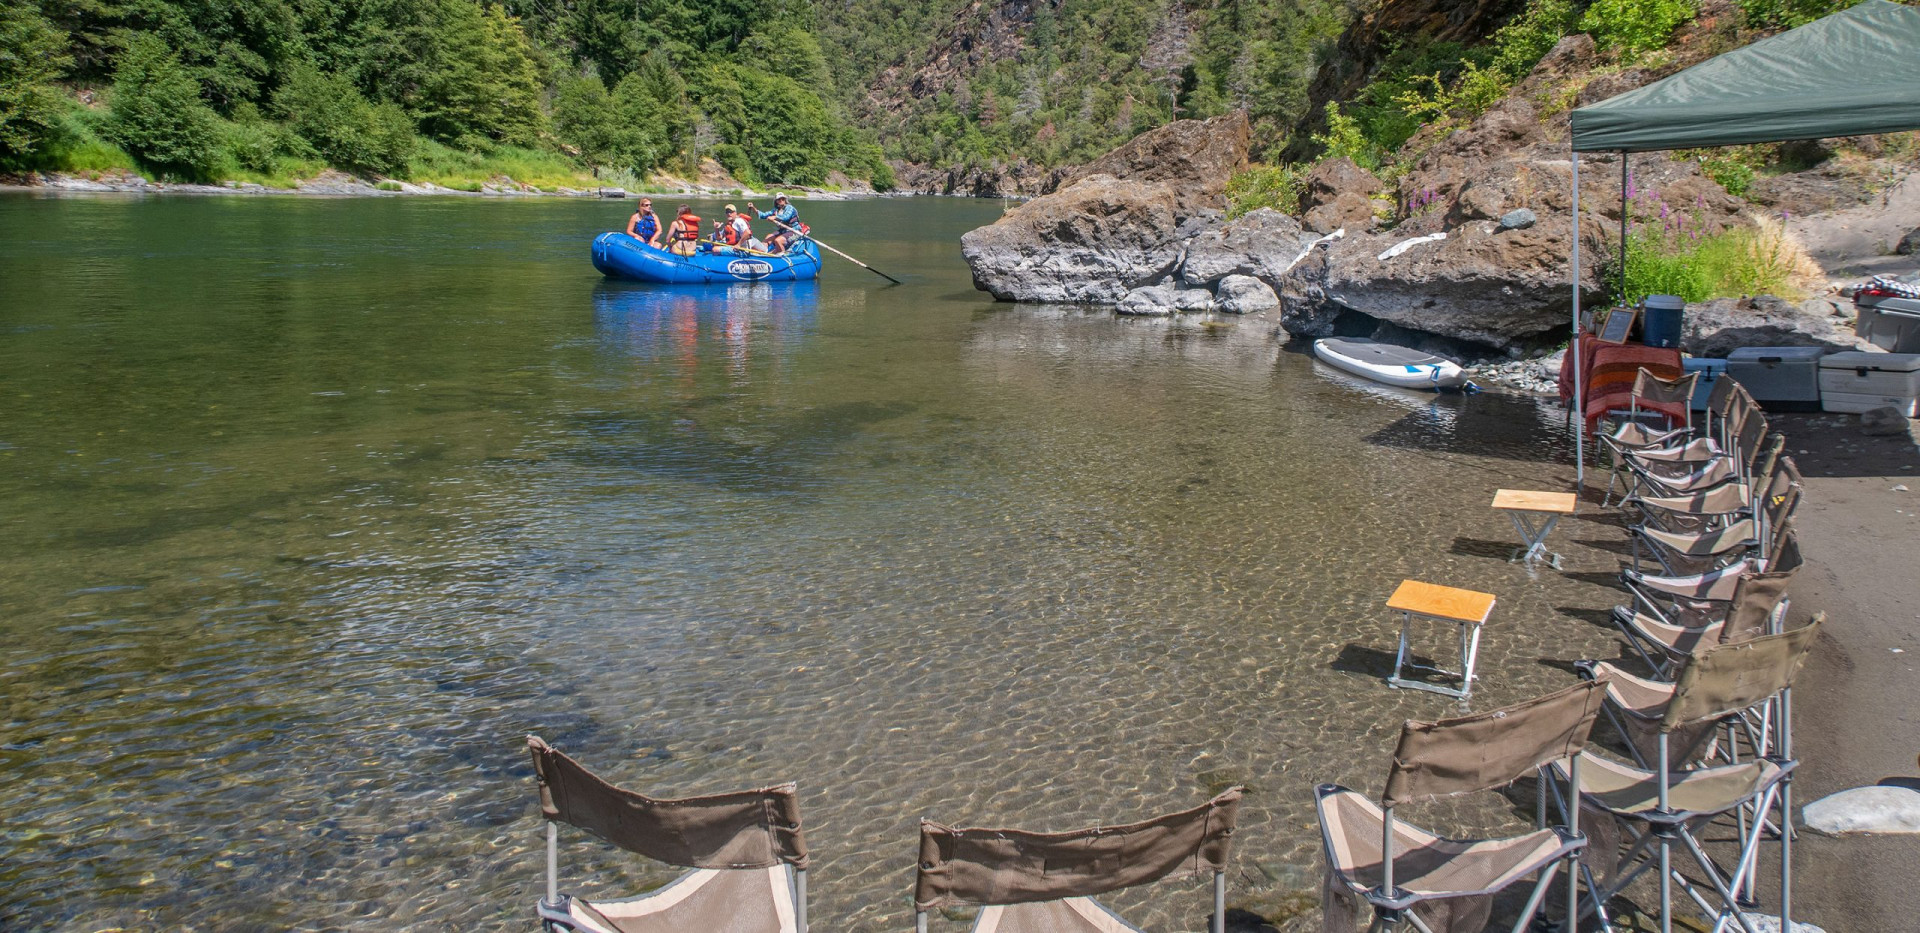 Floating into riverside camp - Luxury camping (glamping) rafting trips